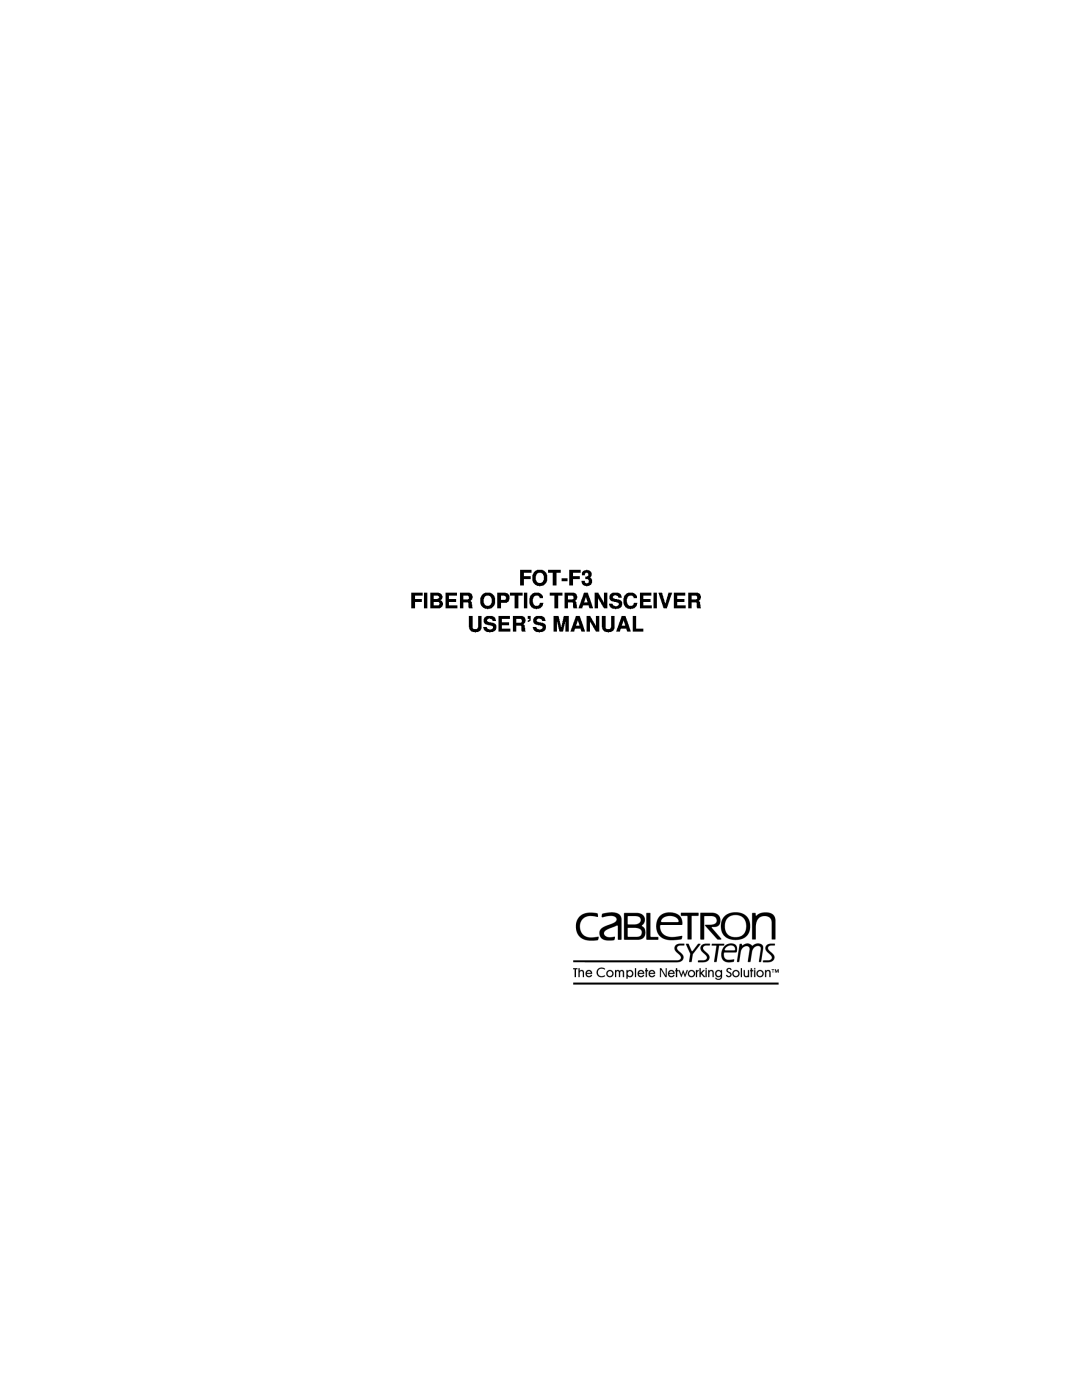 Cabletron Systems user manual FOT-F3 FIBER OPTIC TRANSCEIVER USER’S MANUAL 